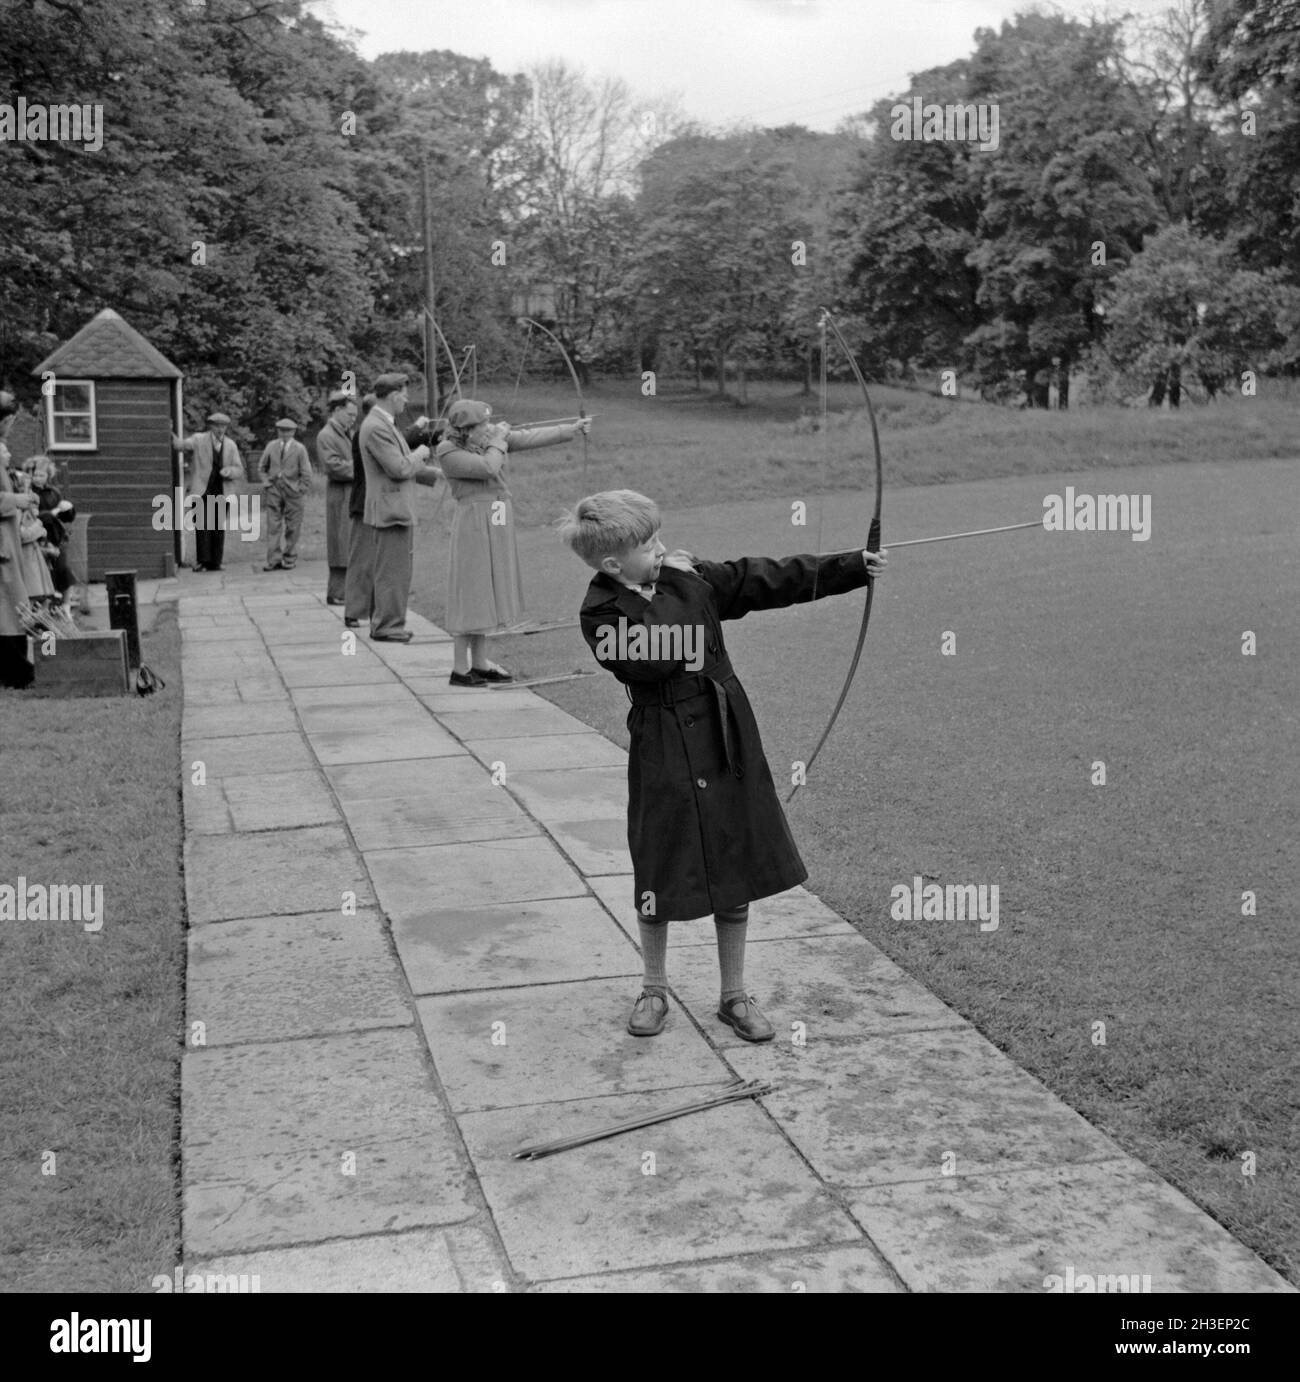 A boy is amongst several people taking aim at an archery range in a park in the UK in the 1950s. He has just released the arrow. This is taken from an amateur photographer’s black and white negative – a vintage 1950s photograph. Stock Photo